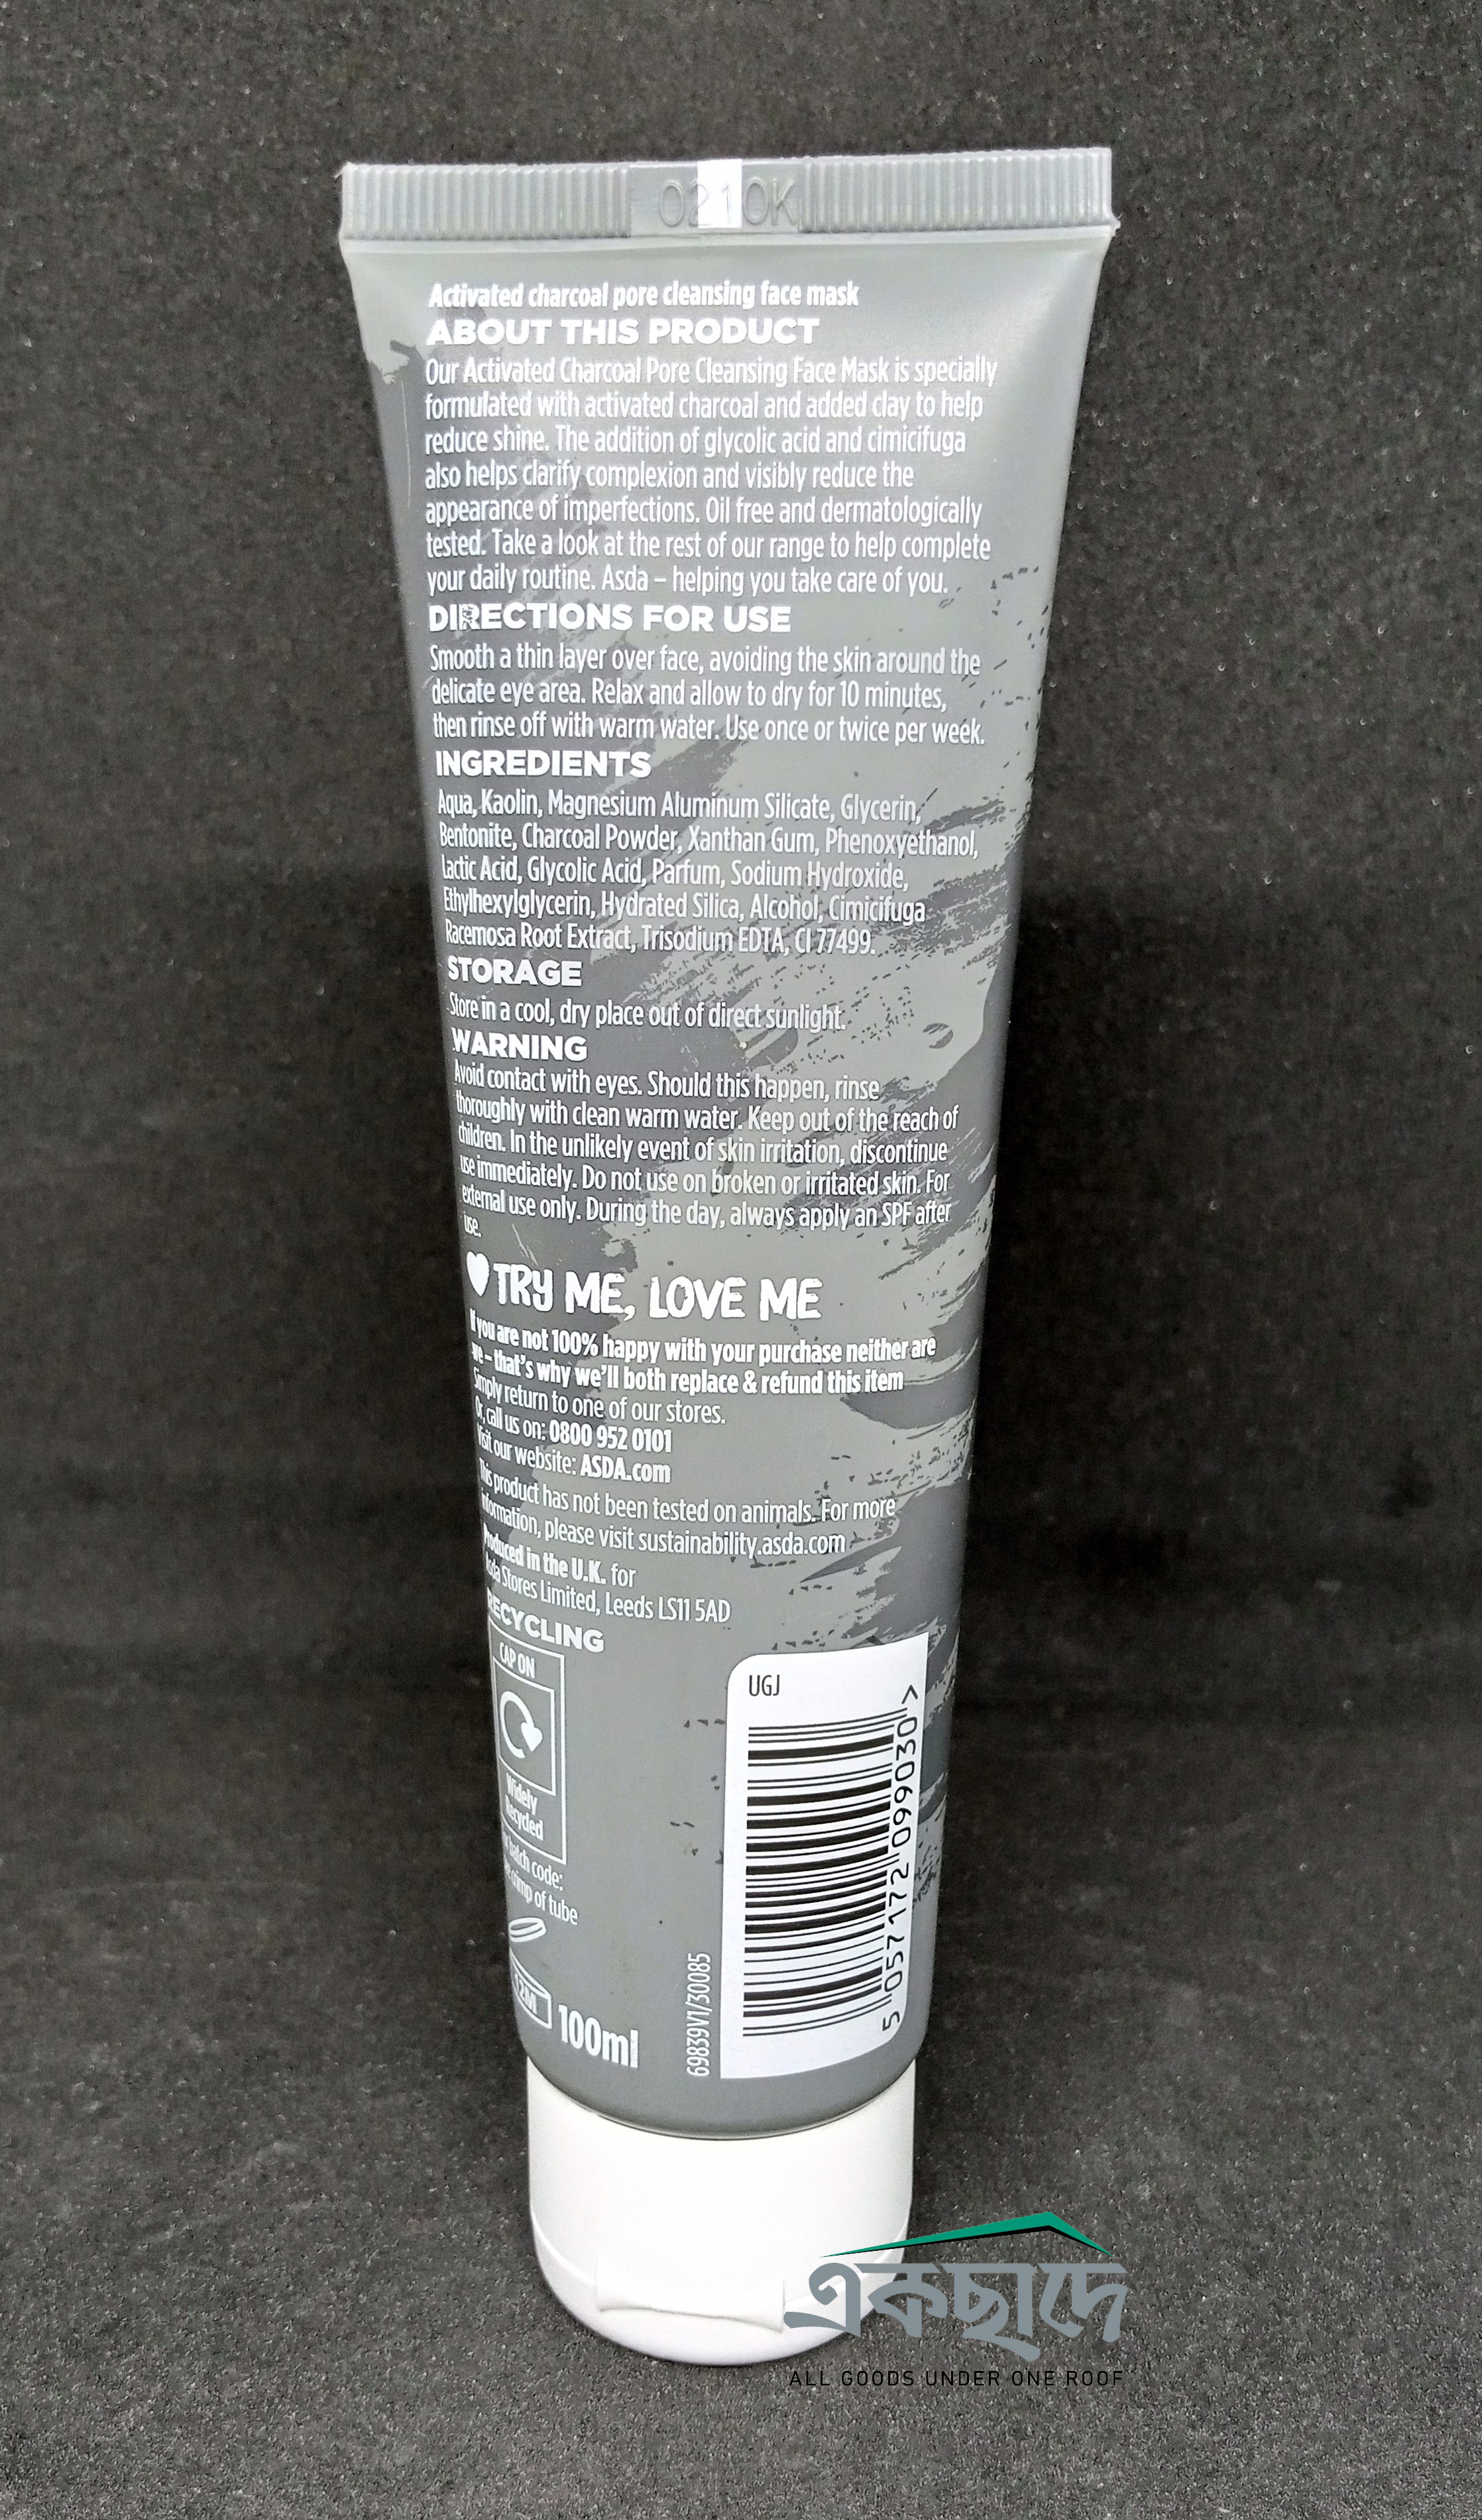 ASDA (UK) ACTIVATED CHARCOAL PORE CLEANSING FACE MASK 100 ML B